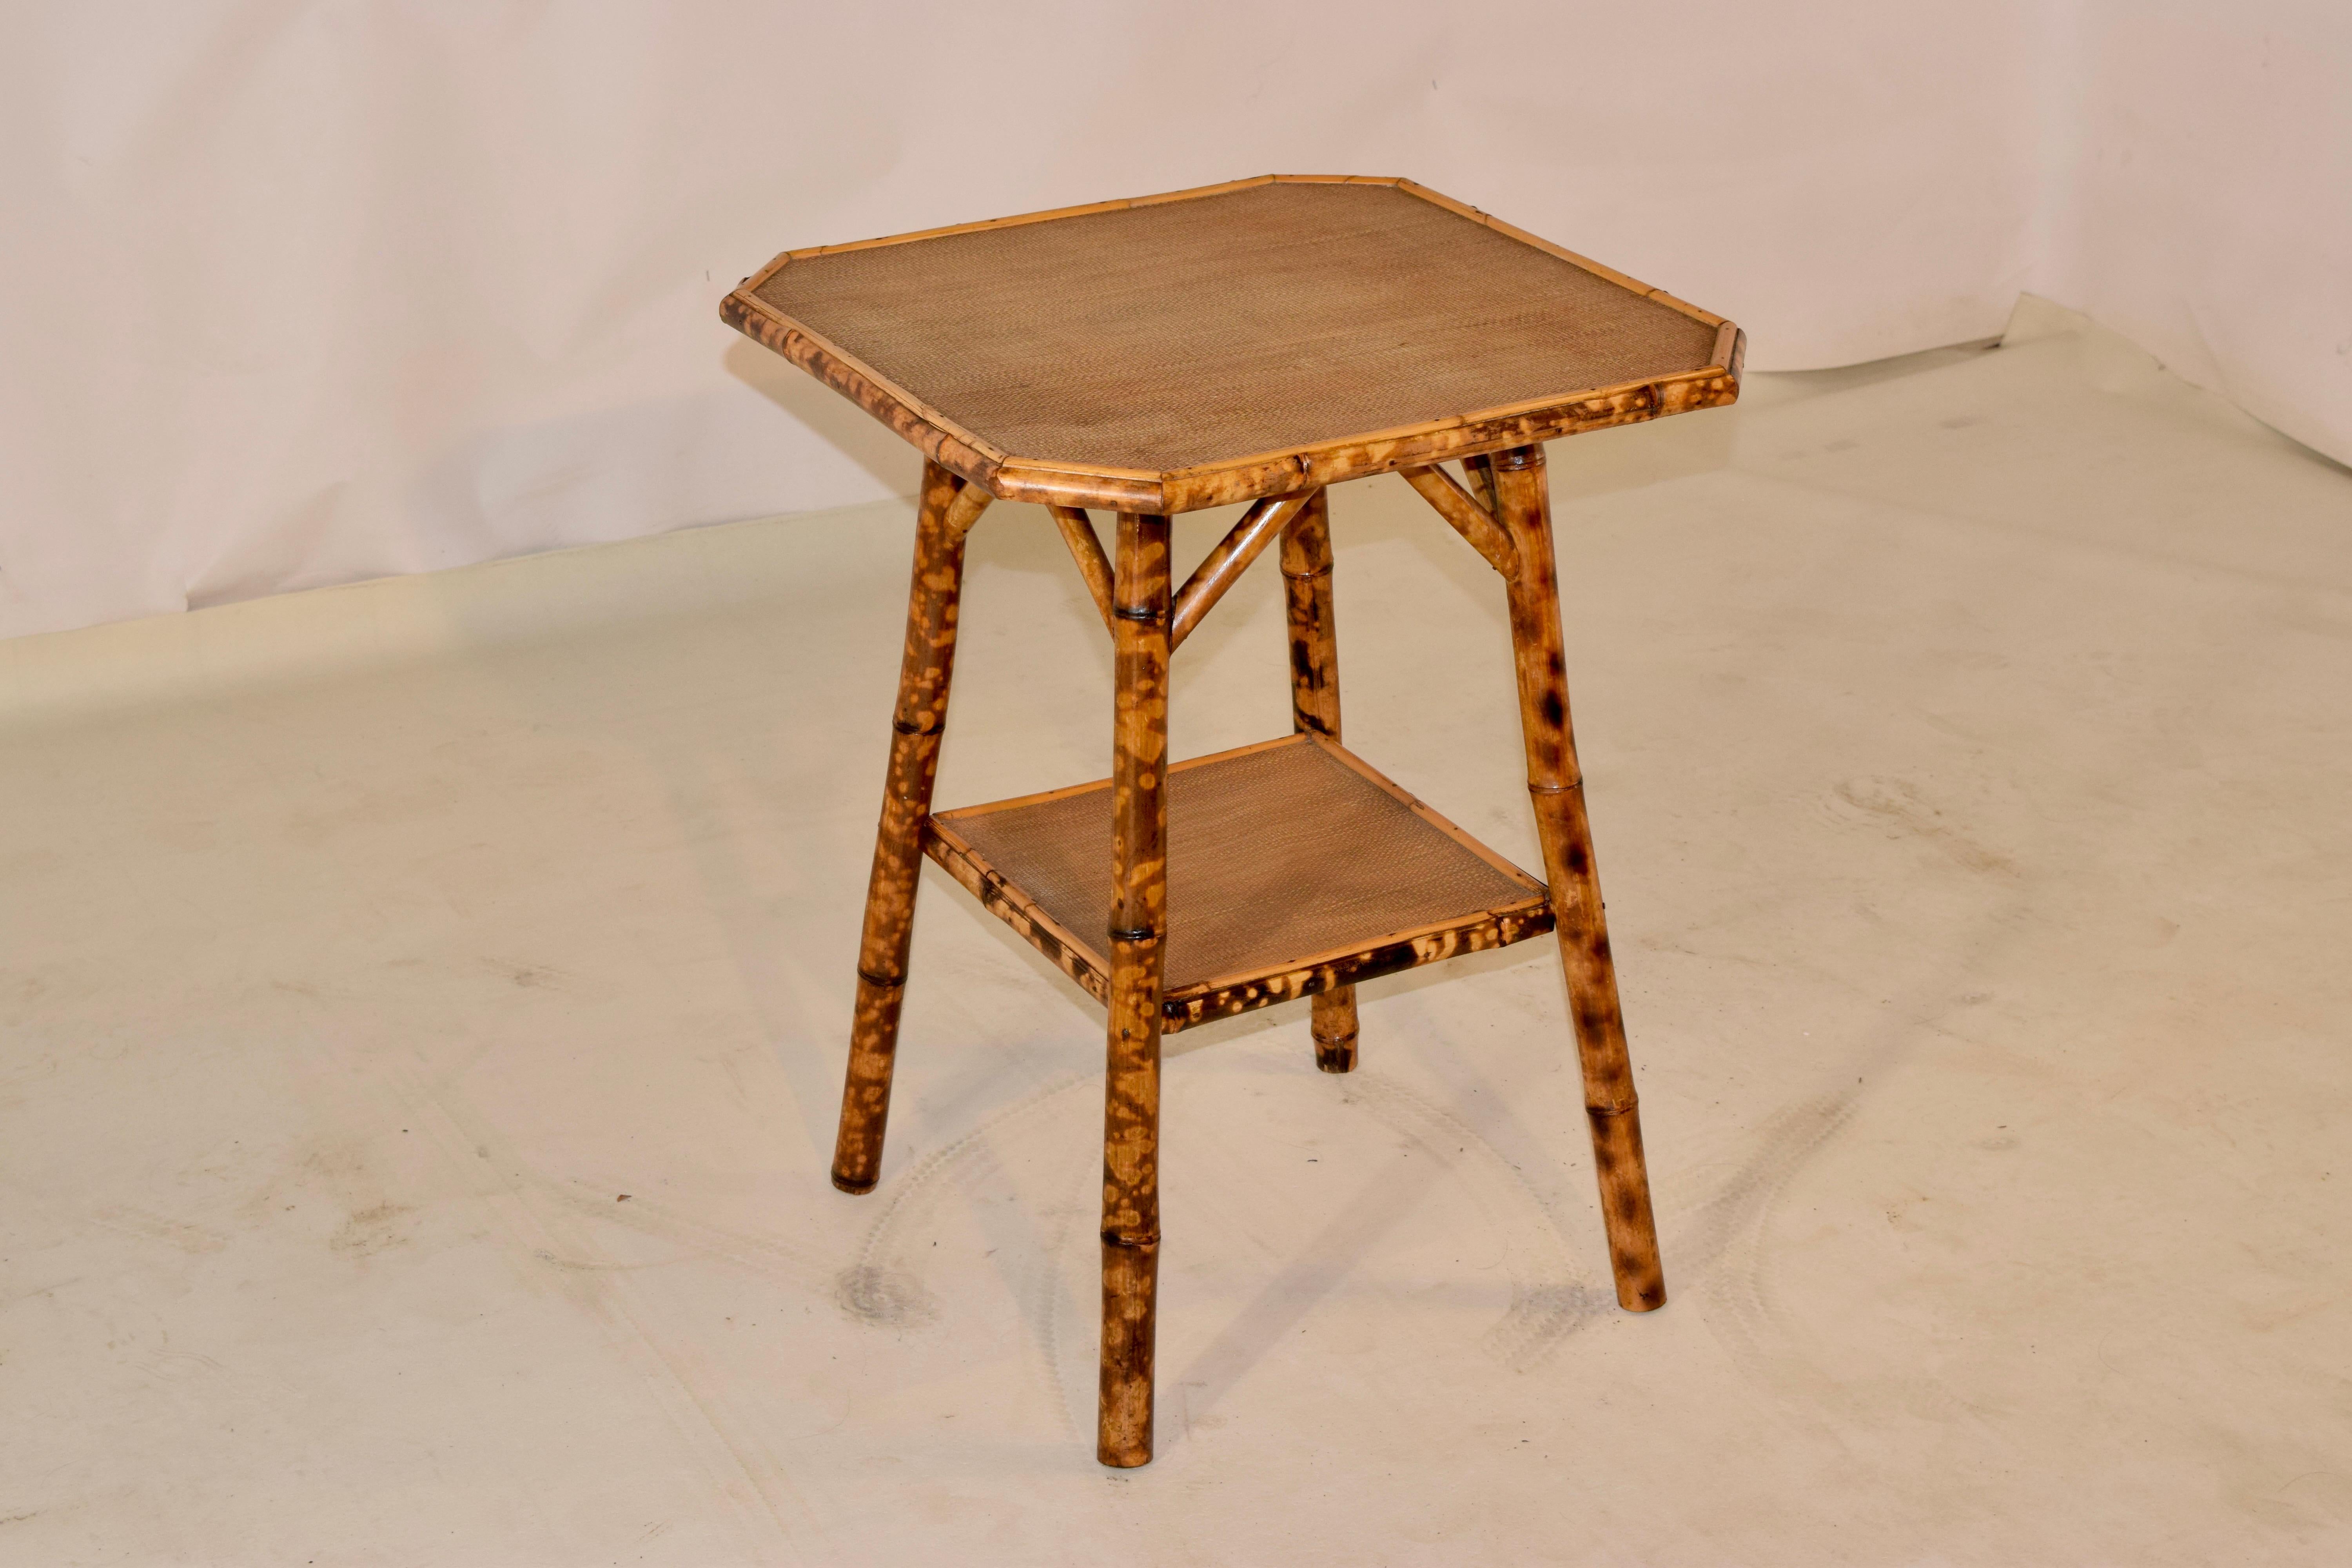 19th century tortoise bamboo table from France with an octagonal shaped top. The top and lower shelf are covered in what appears to be the original rush. Lovely shape and color!.